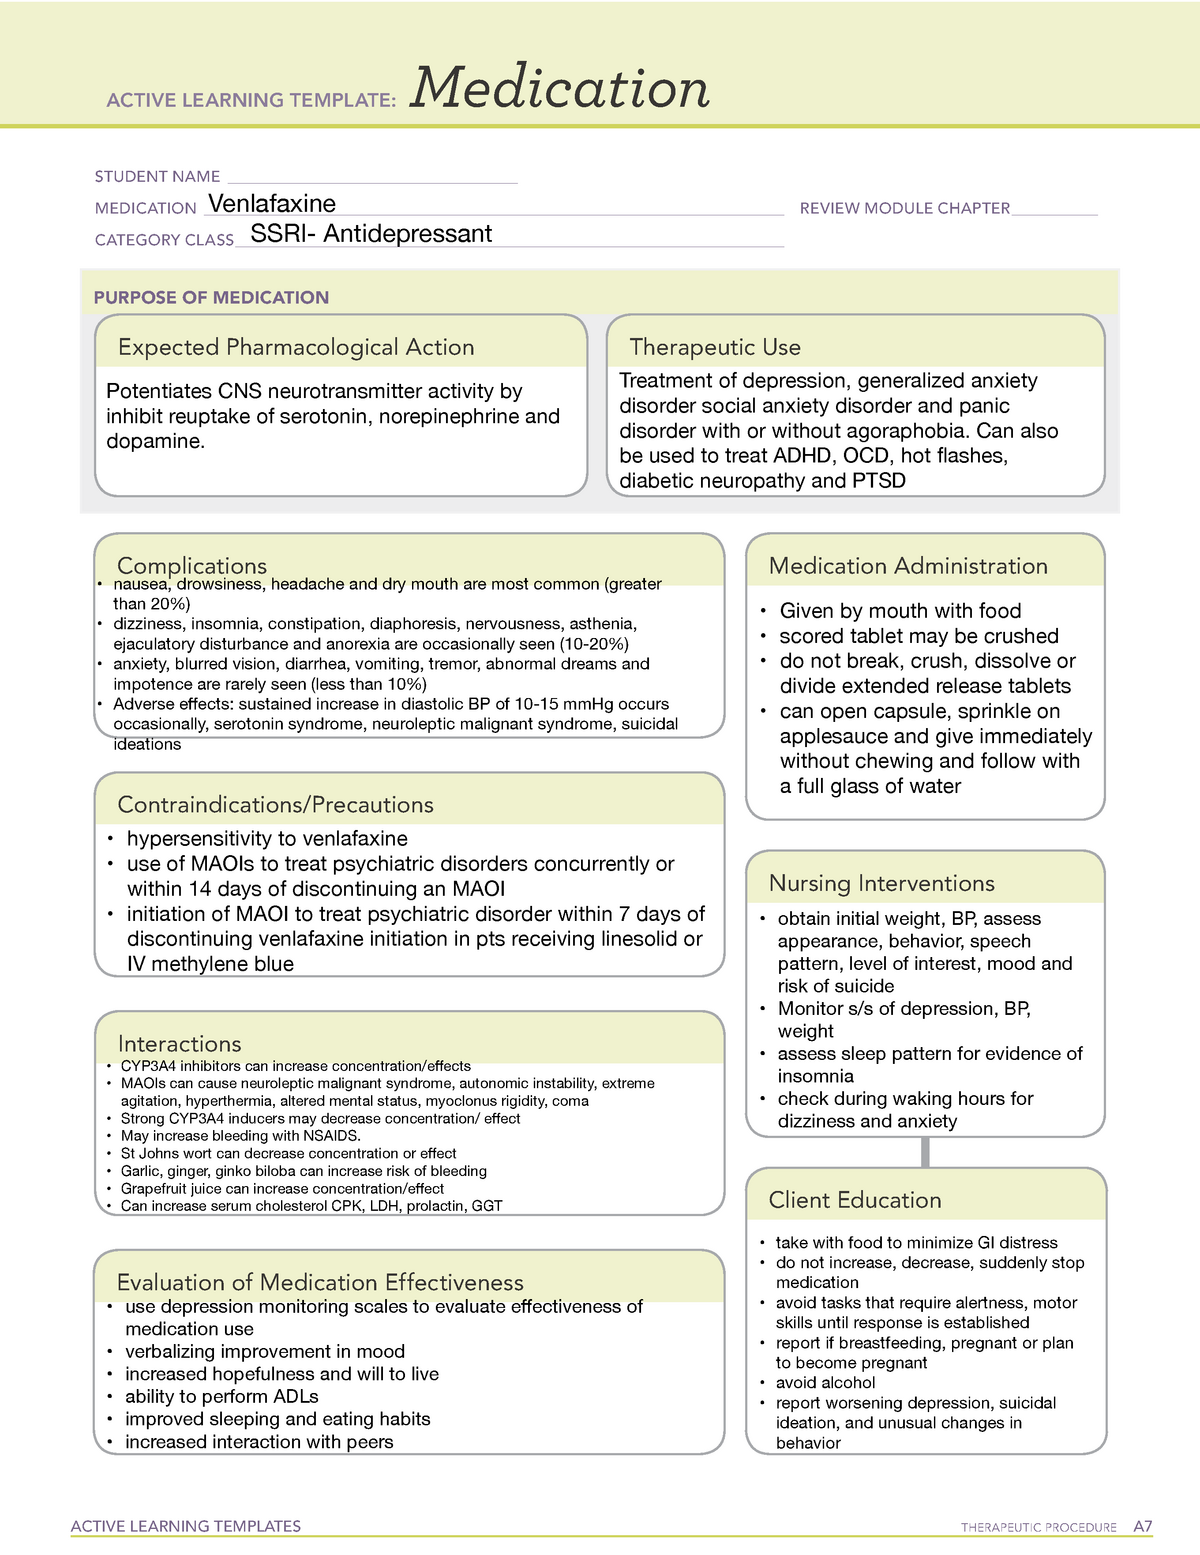 Venlafaxine medication template for pharmacology ACTIVE LEARNING